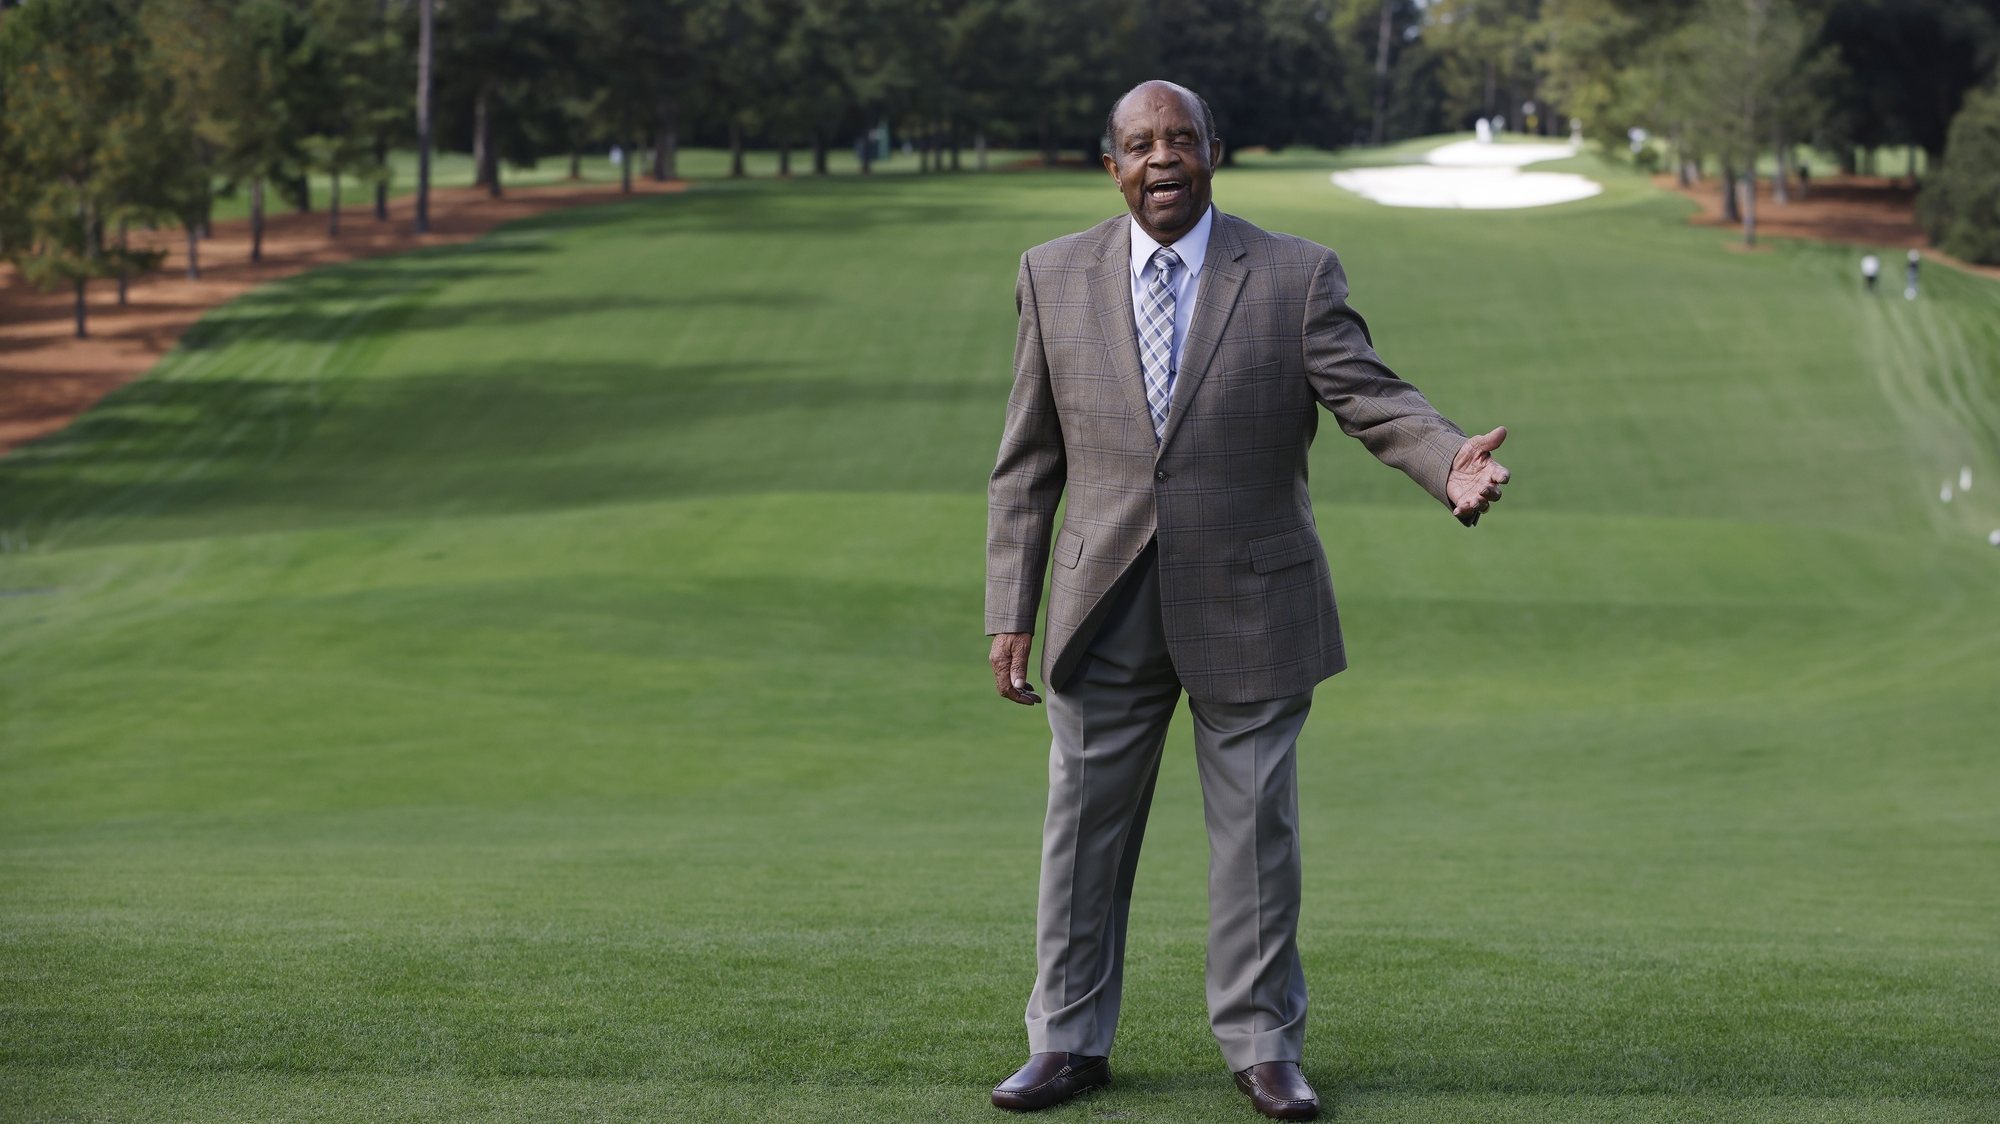 epa08810202 Lee Elder, the first black man to compete in the Masters Tournament in 1975, poses on the first tee during the first practice round of the 2020 Masters Tournament at the Augusta National Golf Club in Augusta, Georgia, USA, 09 November 2020. The Augusta National Golf Club announced that scholarships will be established in Elder&#039;s name and he has been invited to be an Honorary Starter for the 2021 Masters.  EPA/ERIK S. LESSER